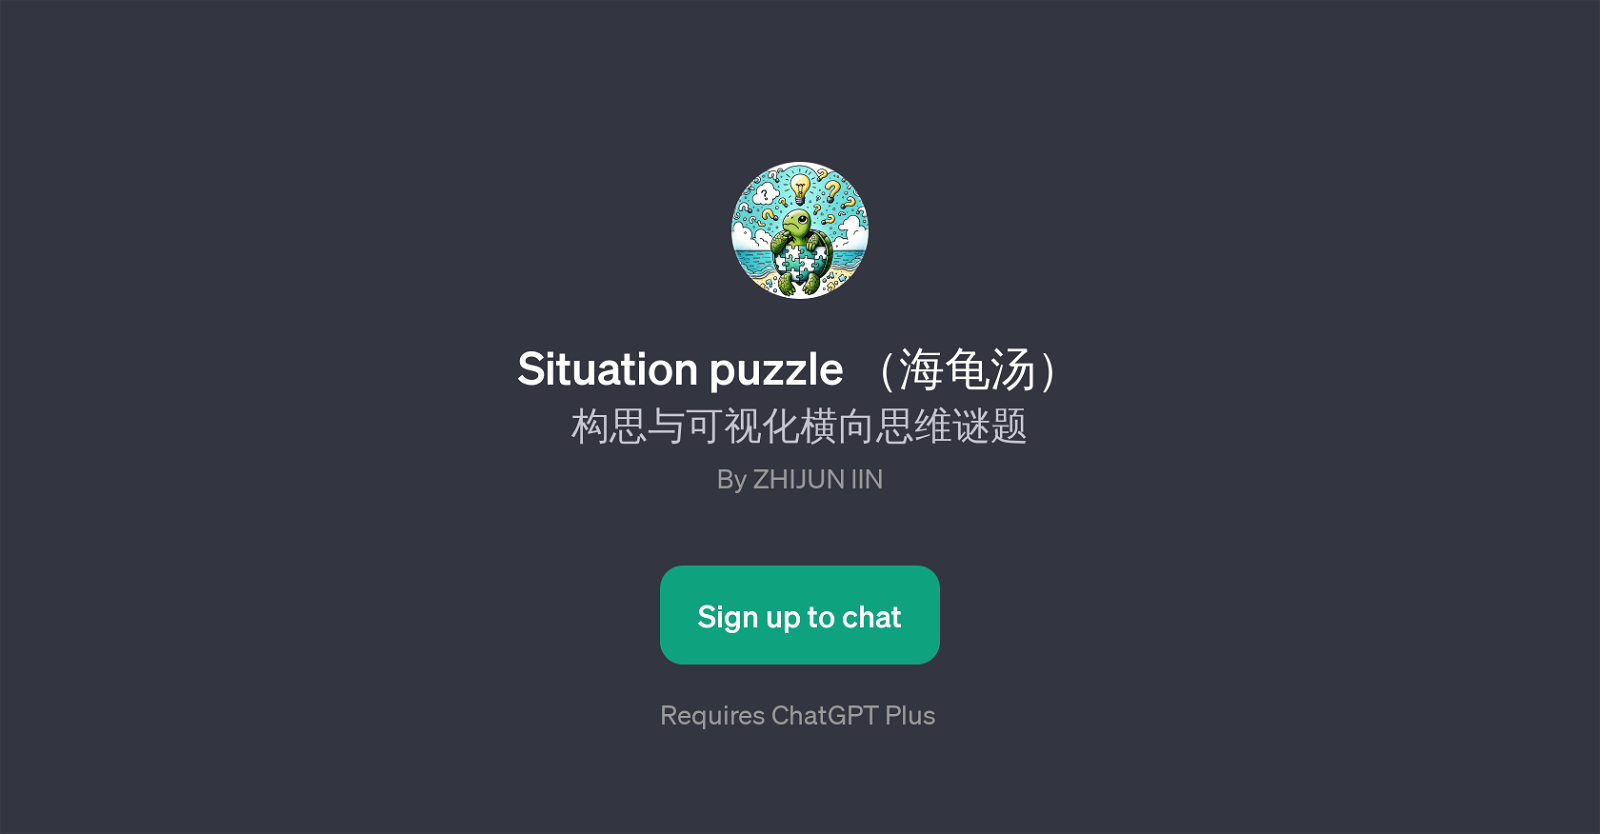 Situation puzzle website